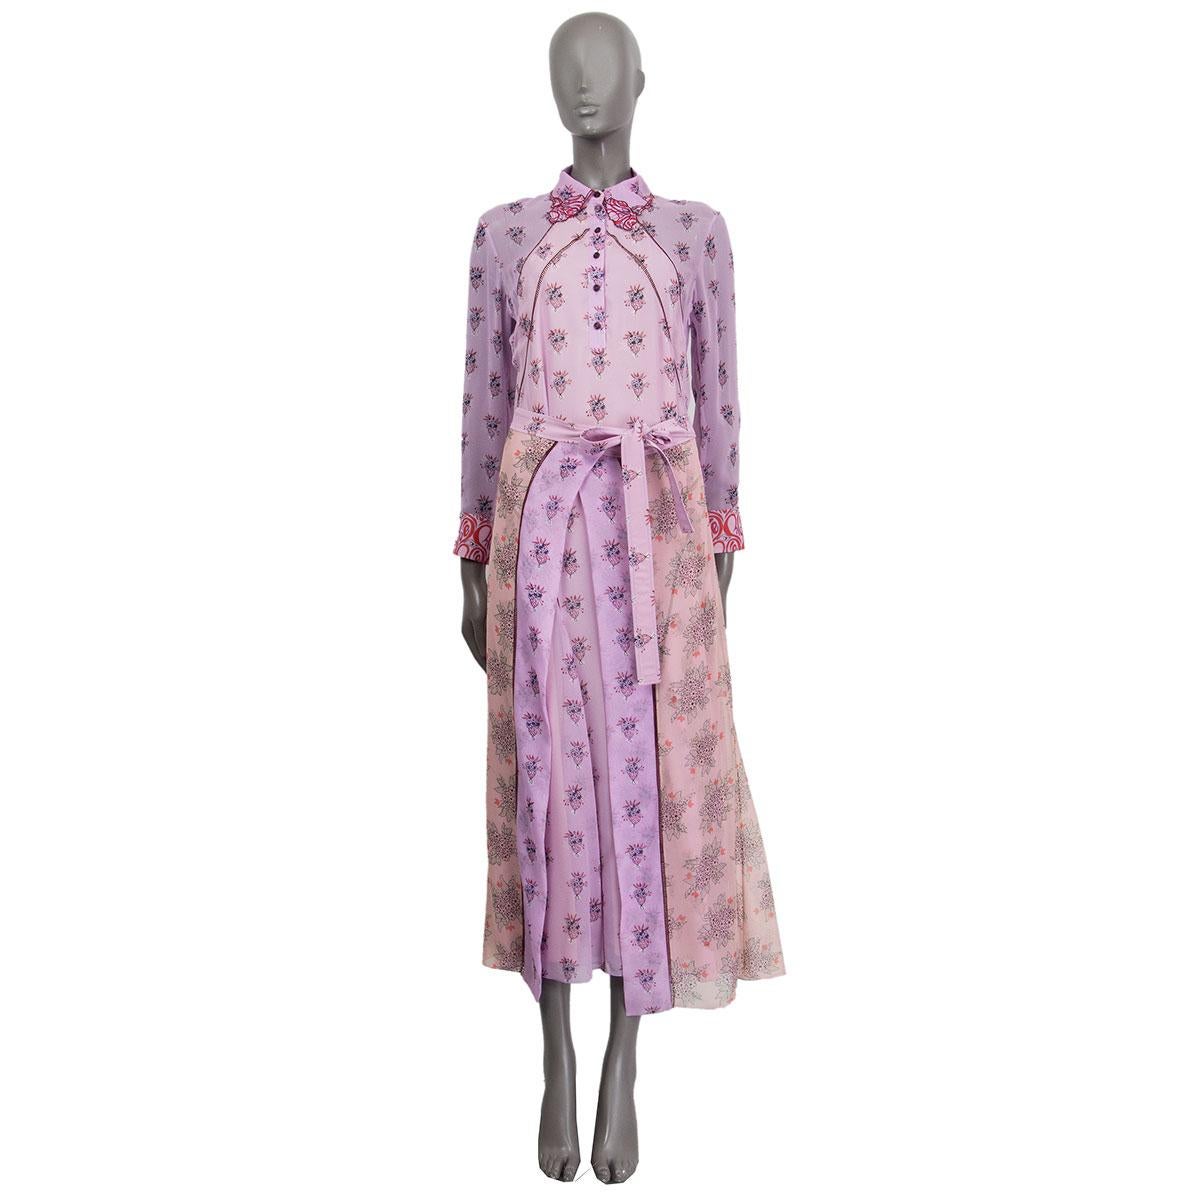 100% authentic Chloé shirt wrap dress in lilac, red, purple and burgundy in silk (100%) with a floral print. Features two long side openings and long sleeves with two-button cuffs. Comes with a slip dress in nude silk (100%). Closes with a concealed